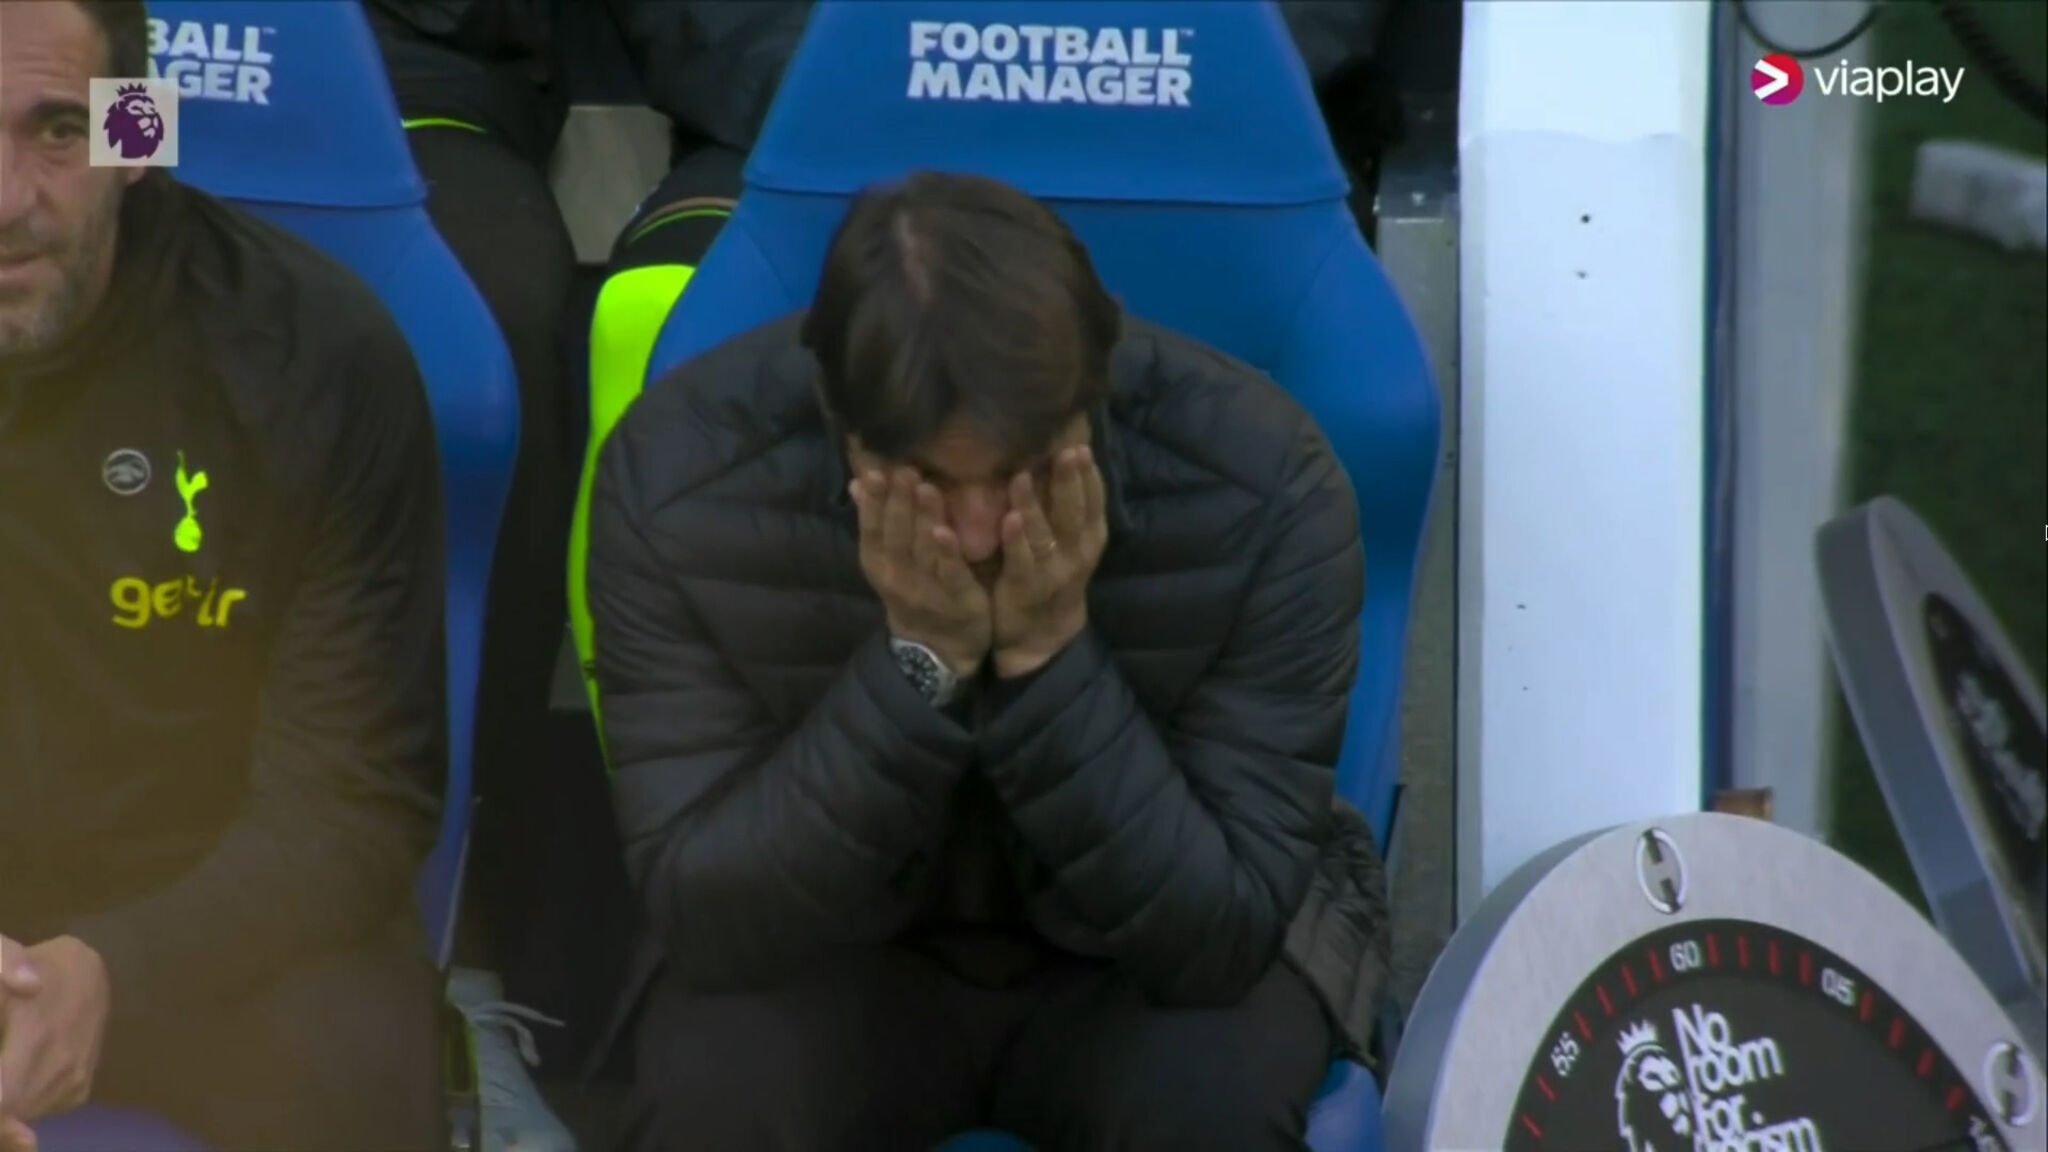 Conte was moved to tears while touching the tribute: